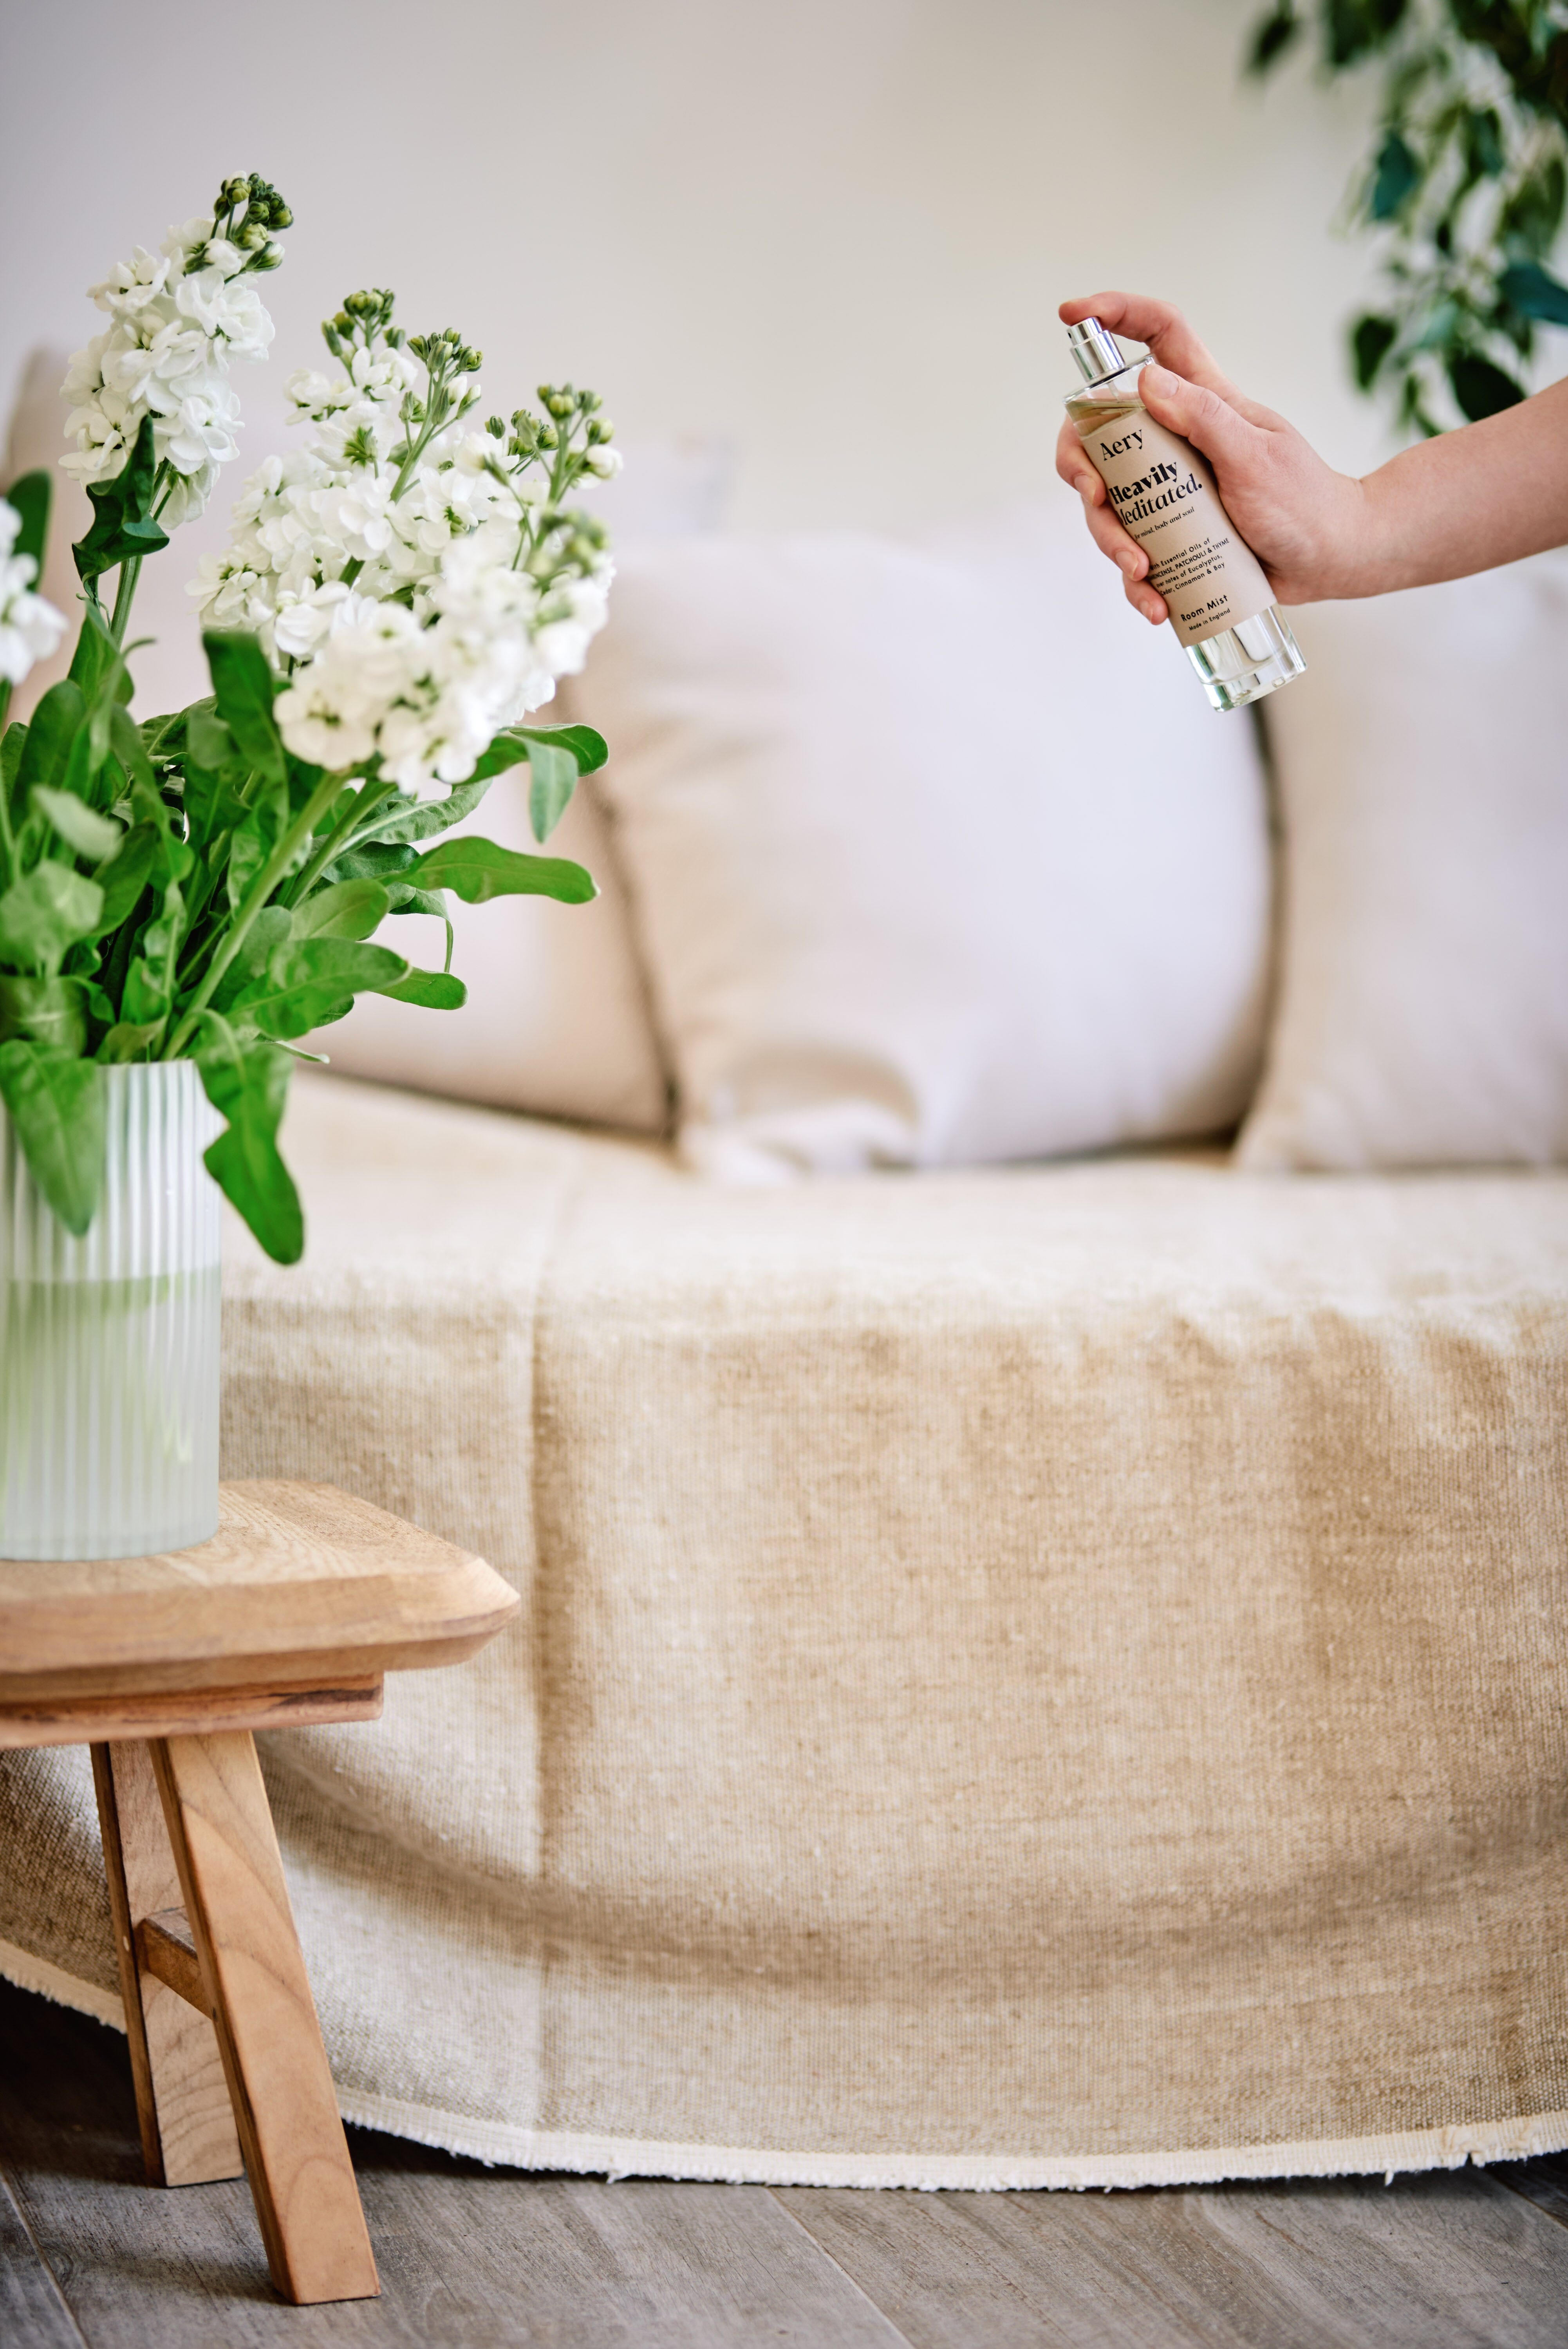 Beige Heavily Meditated room mist by Aery displayed in hand next to vase of white flowers 